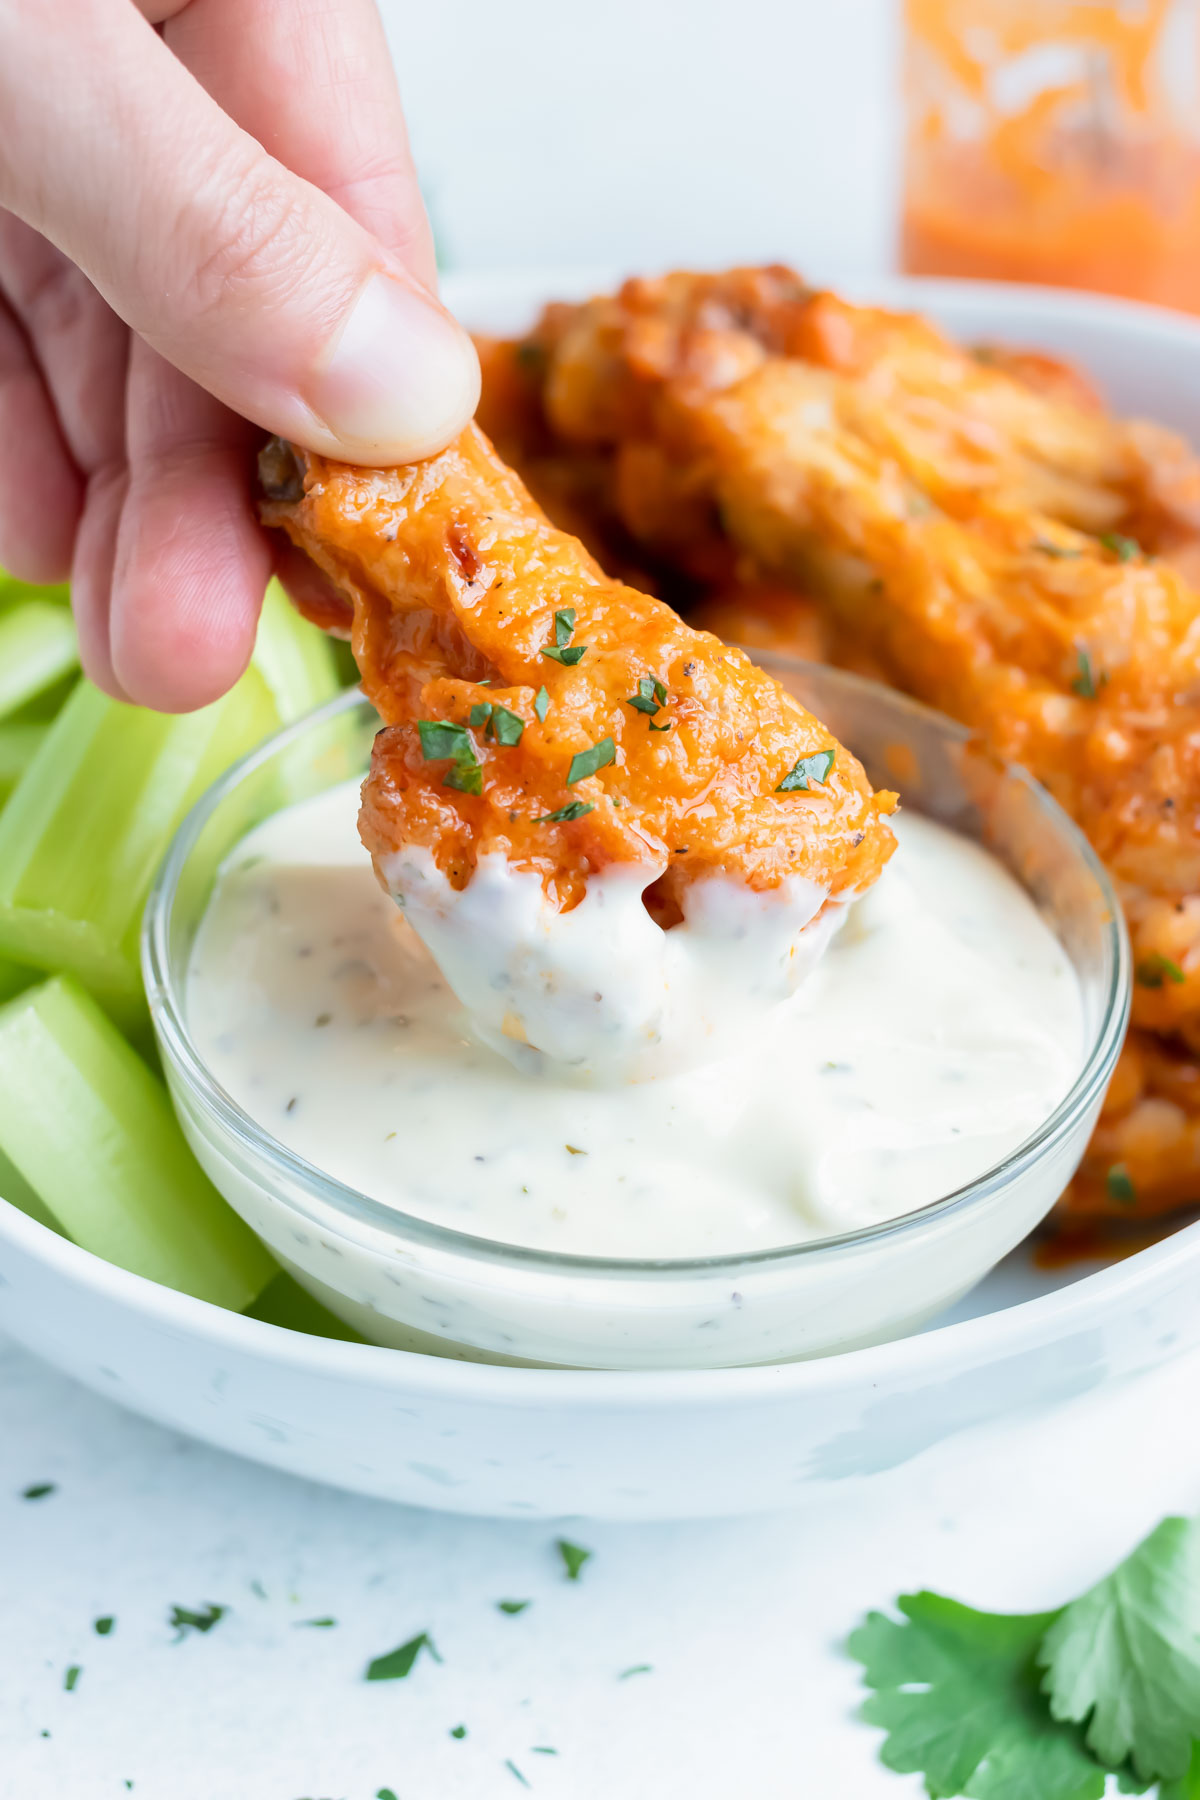 A low-carb buffalo chicken wing is dipped in ranch dressing.